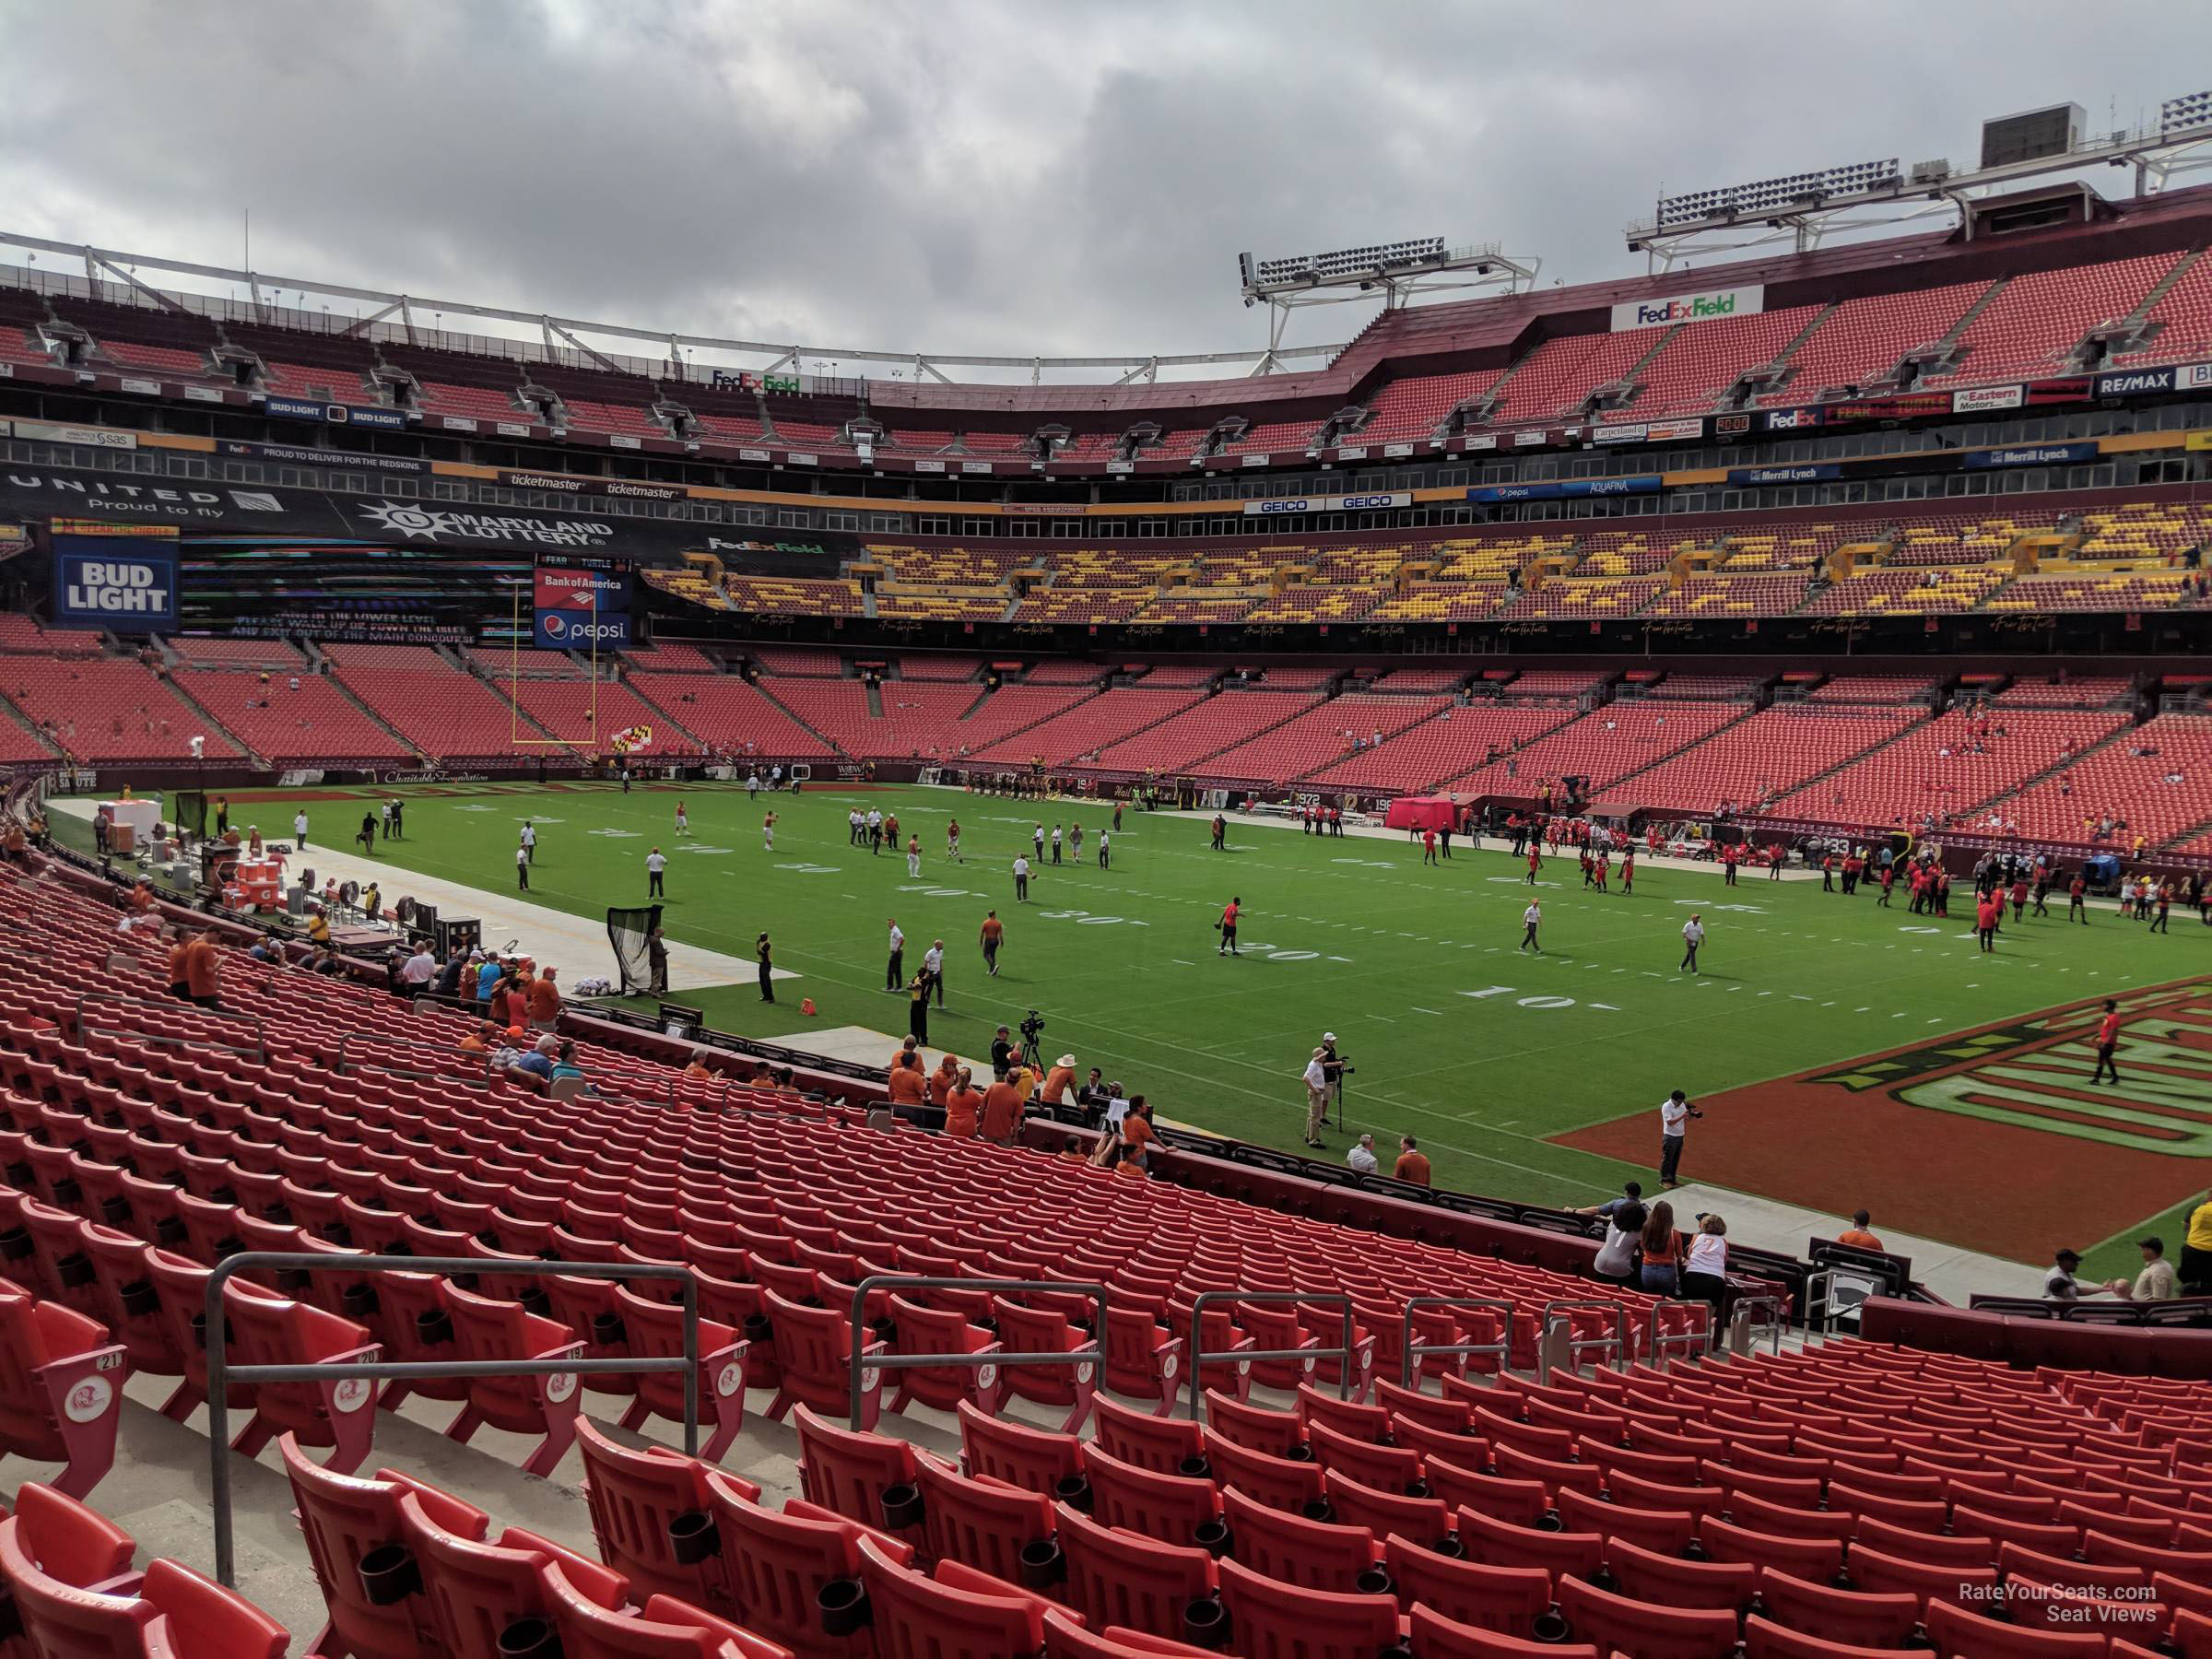 section 116, row 25 seat view  - fedexfield